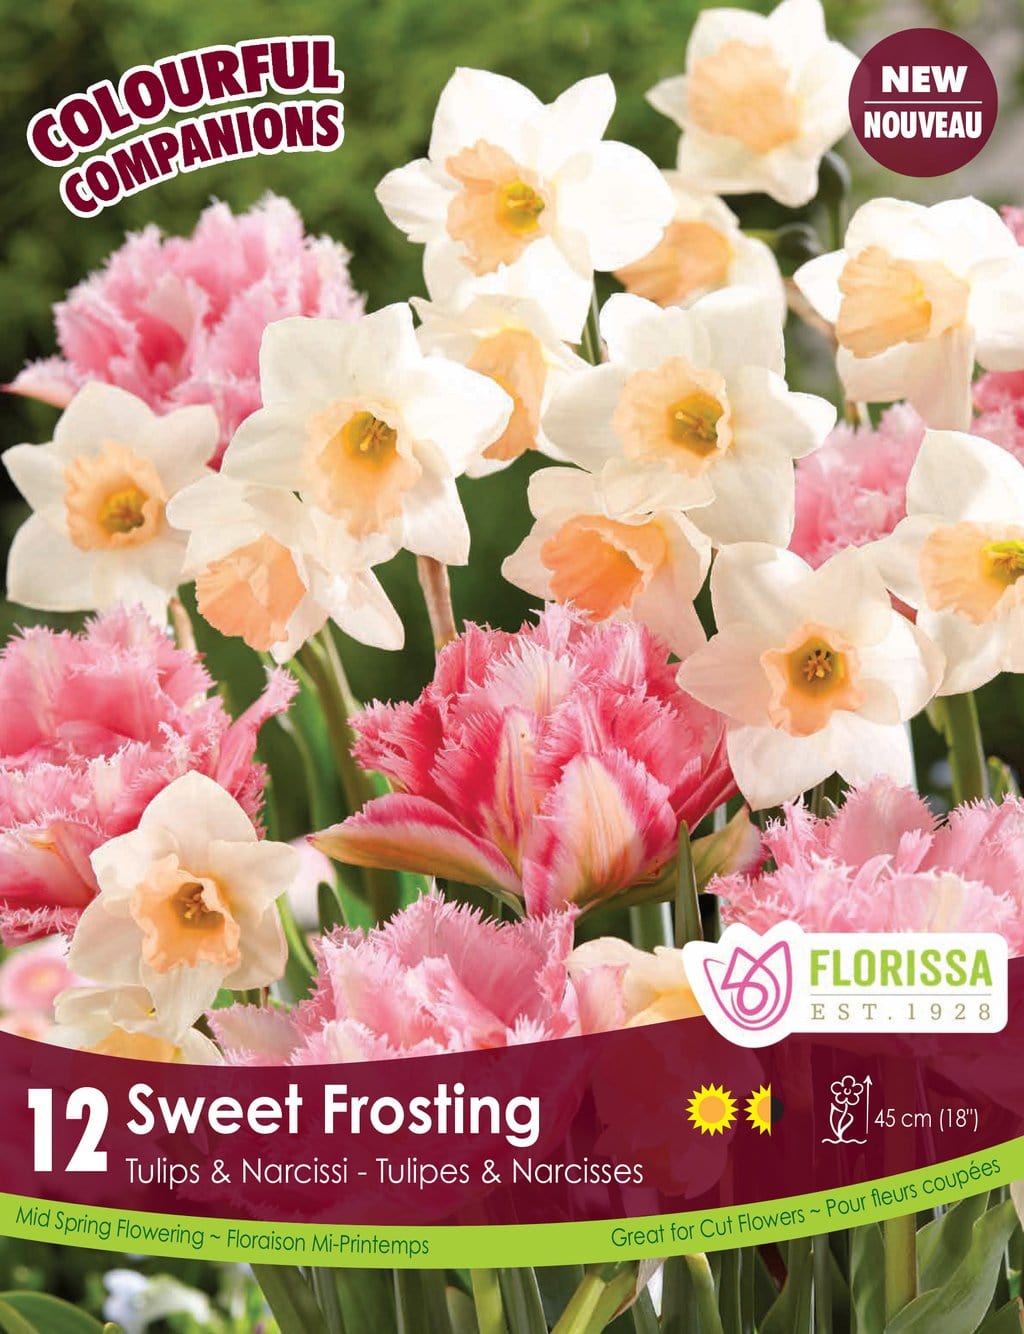 Tulips & Narcissi - Sweet Frosting, Colourful Companions, 12 Pack